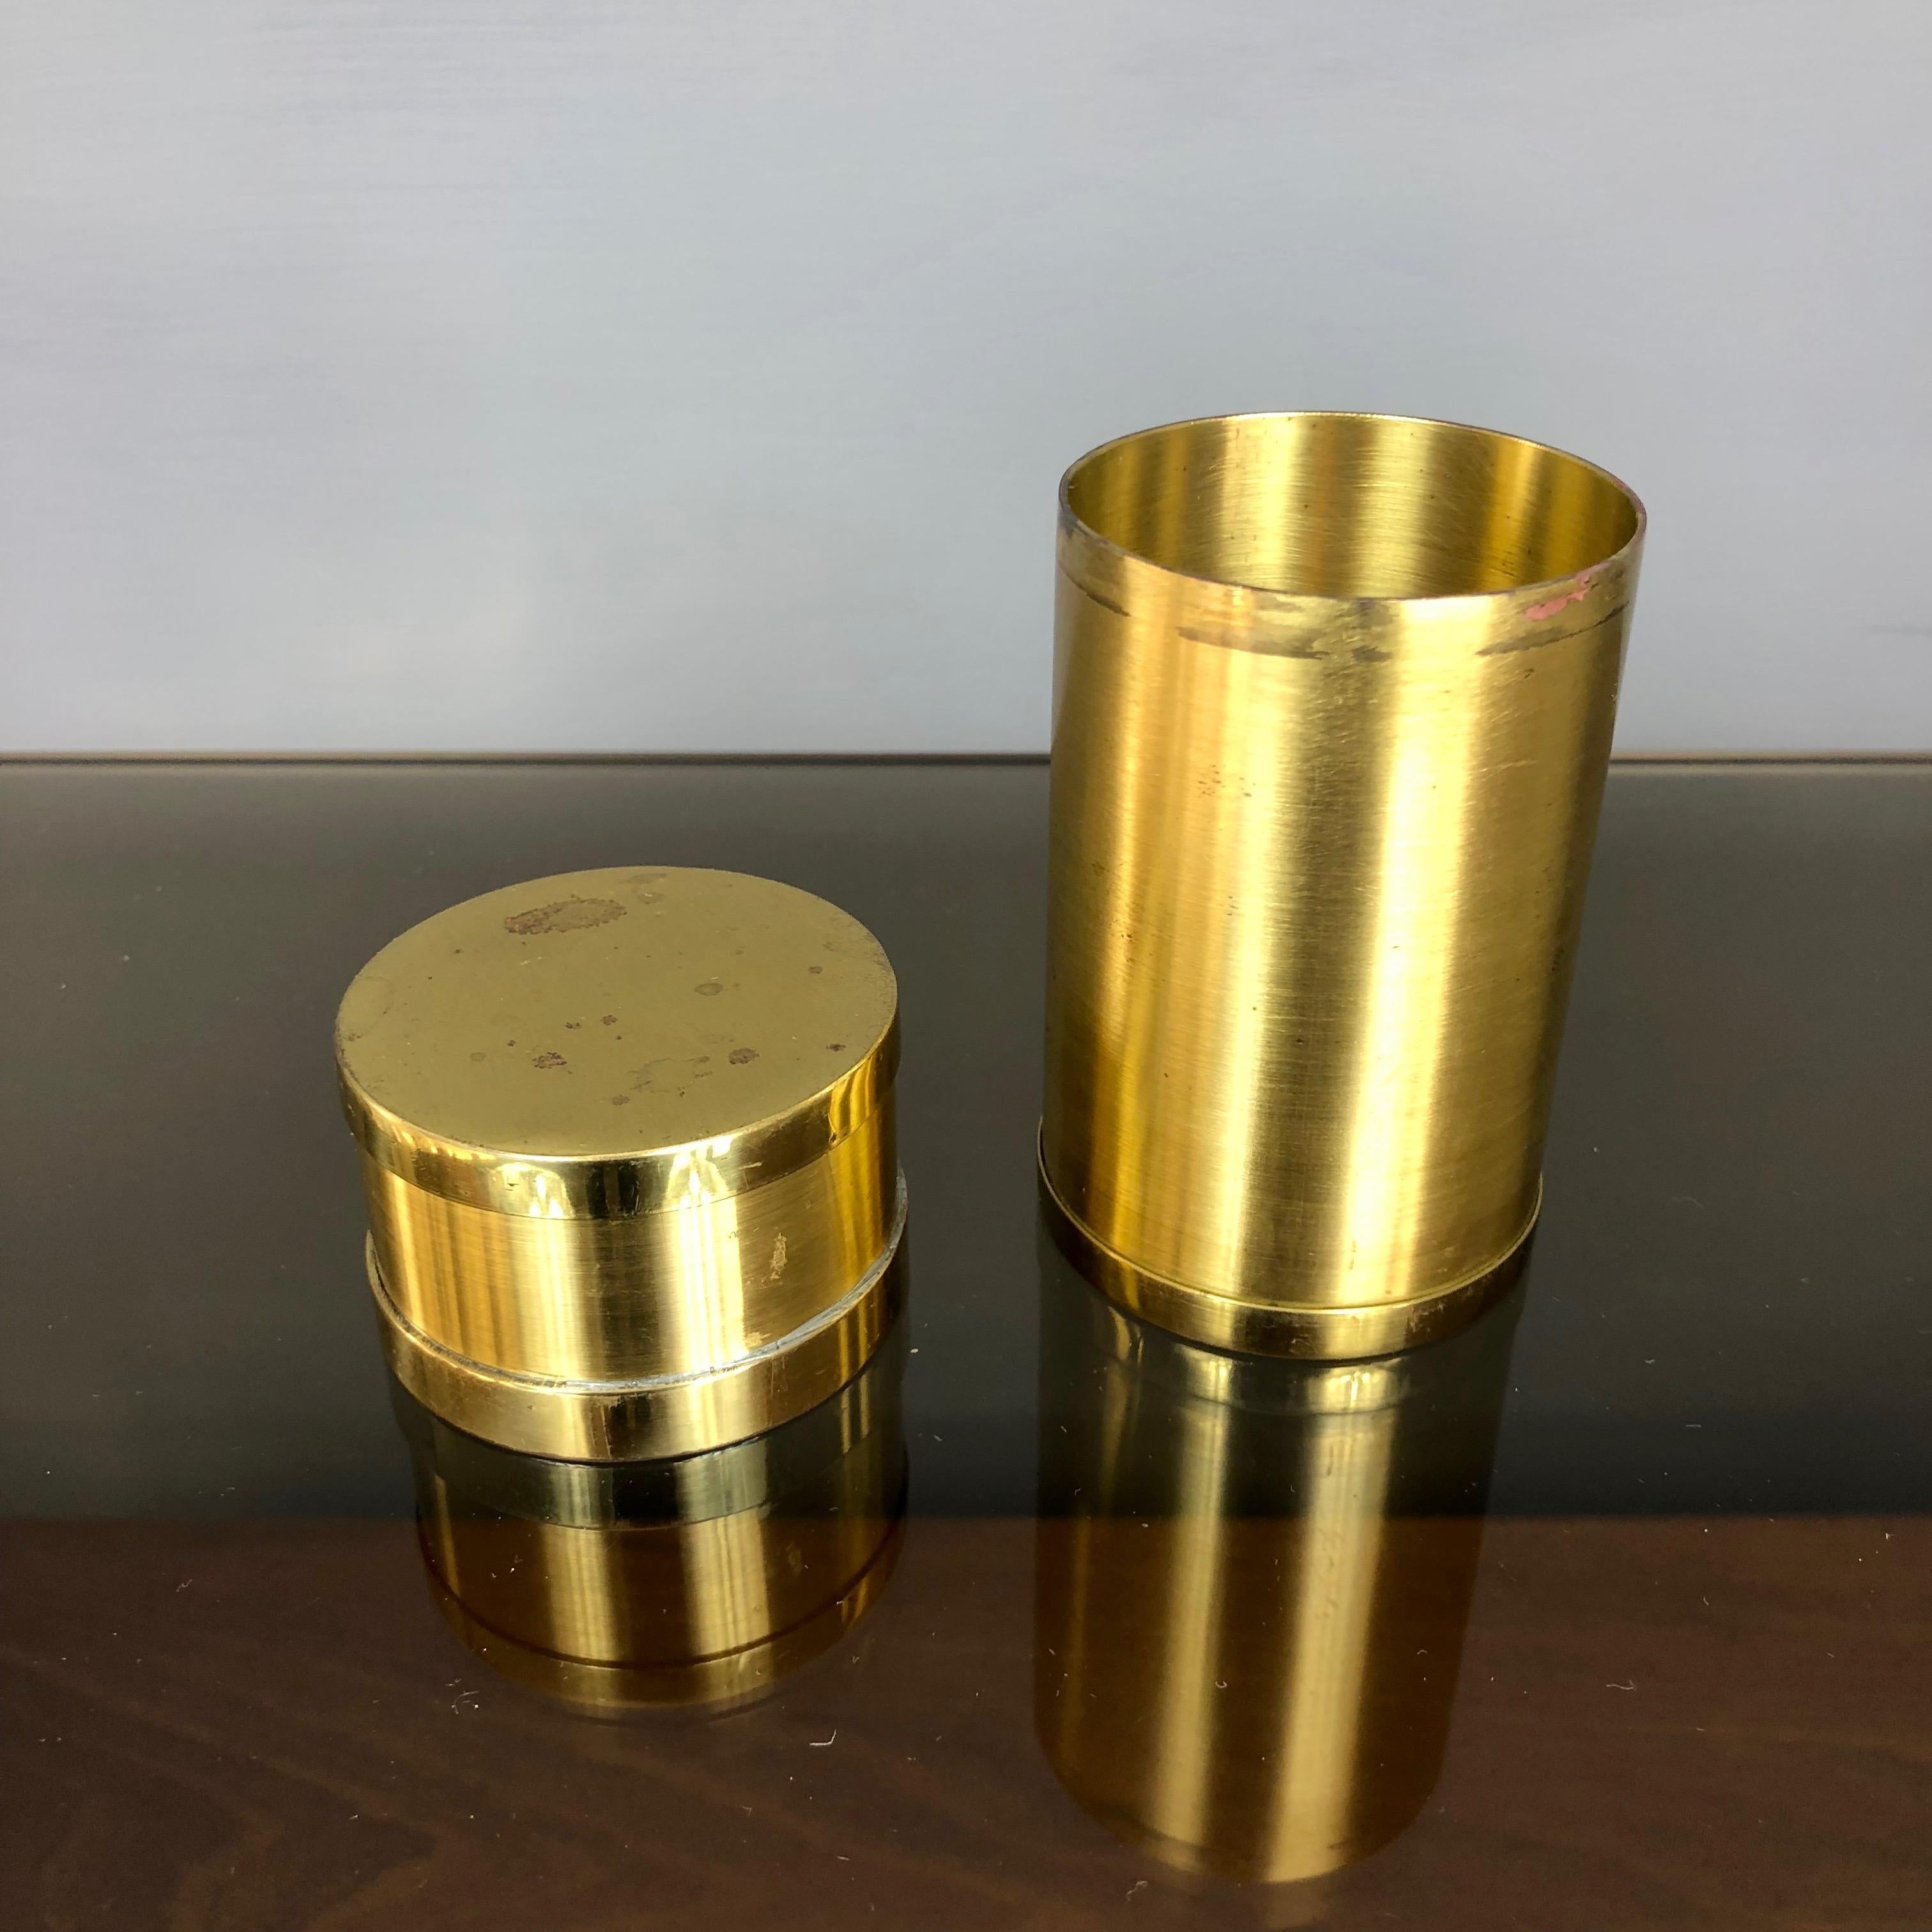 Brass box made by the Italian designer Gabriella Crespi, signature engraved on the bottom. Italy, circa 1970.
The photos show the brass condition, fair considering its age.